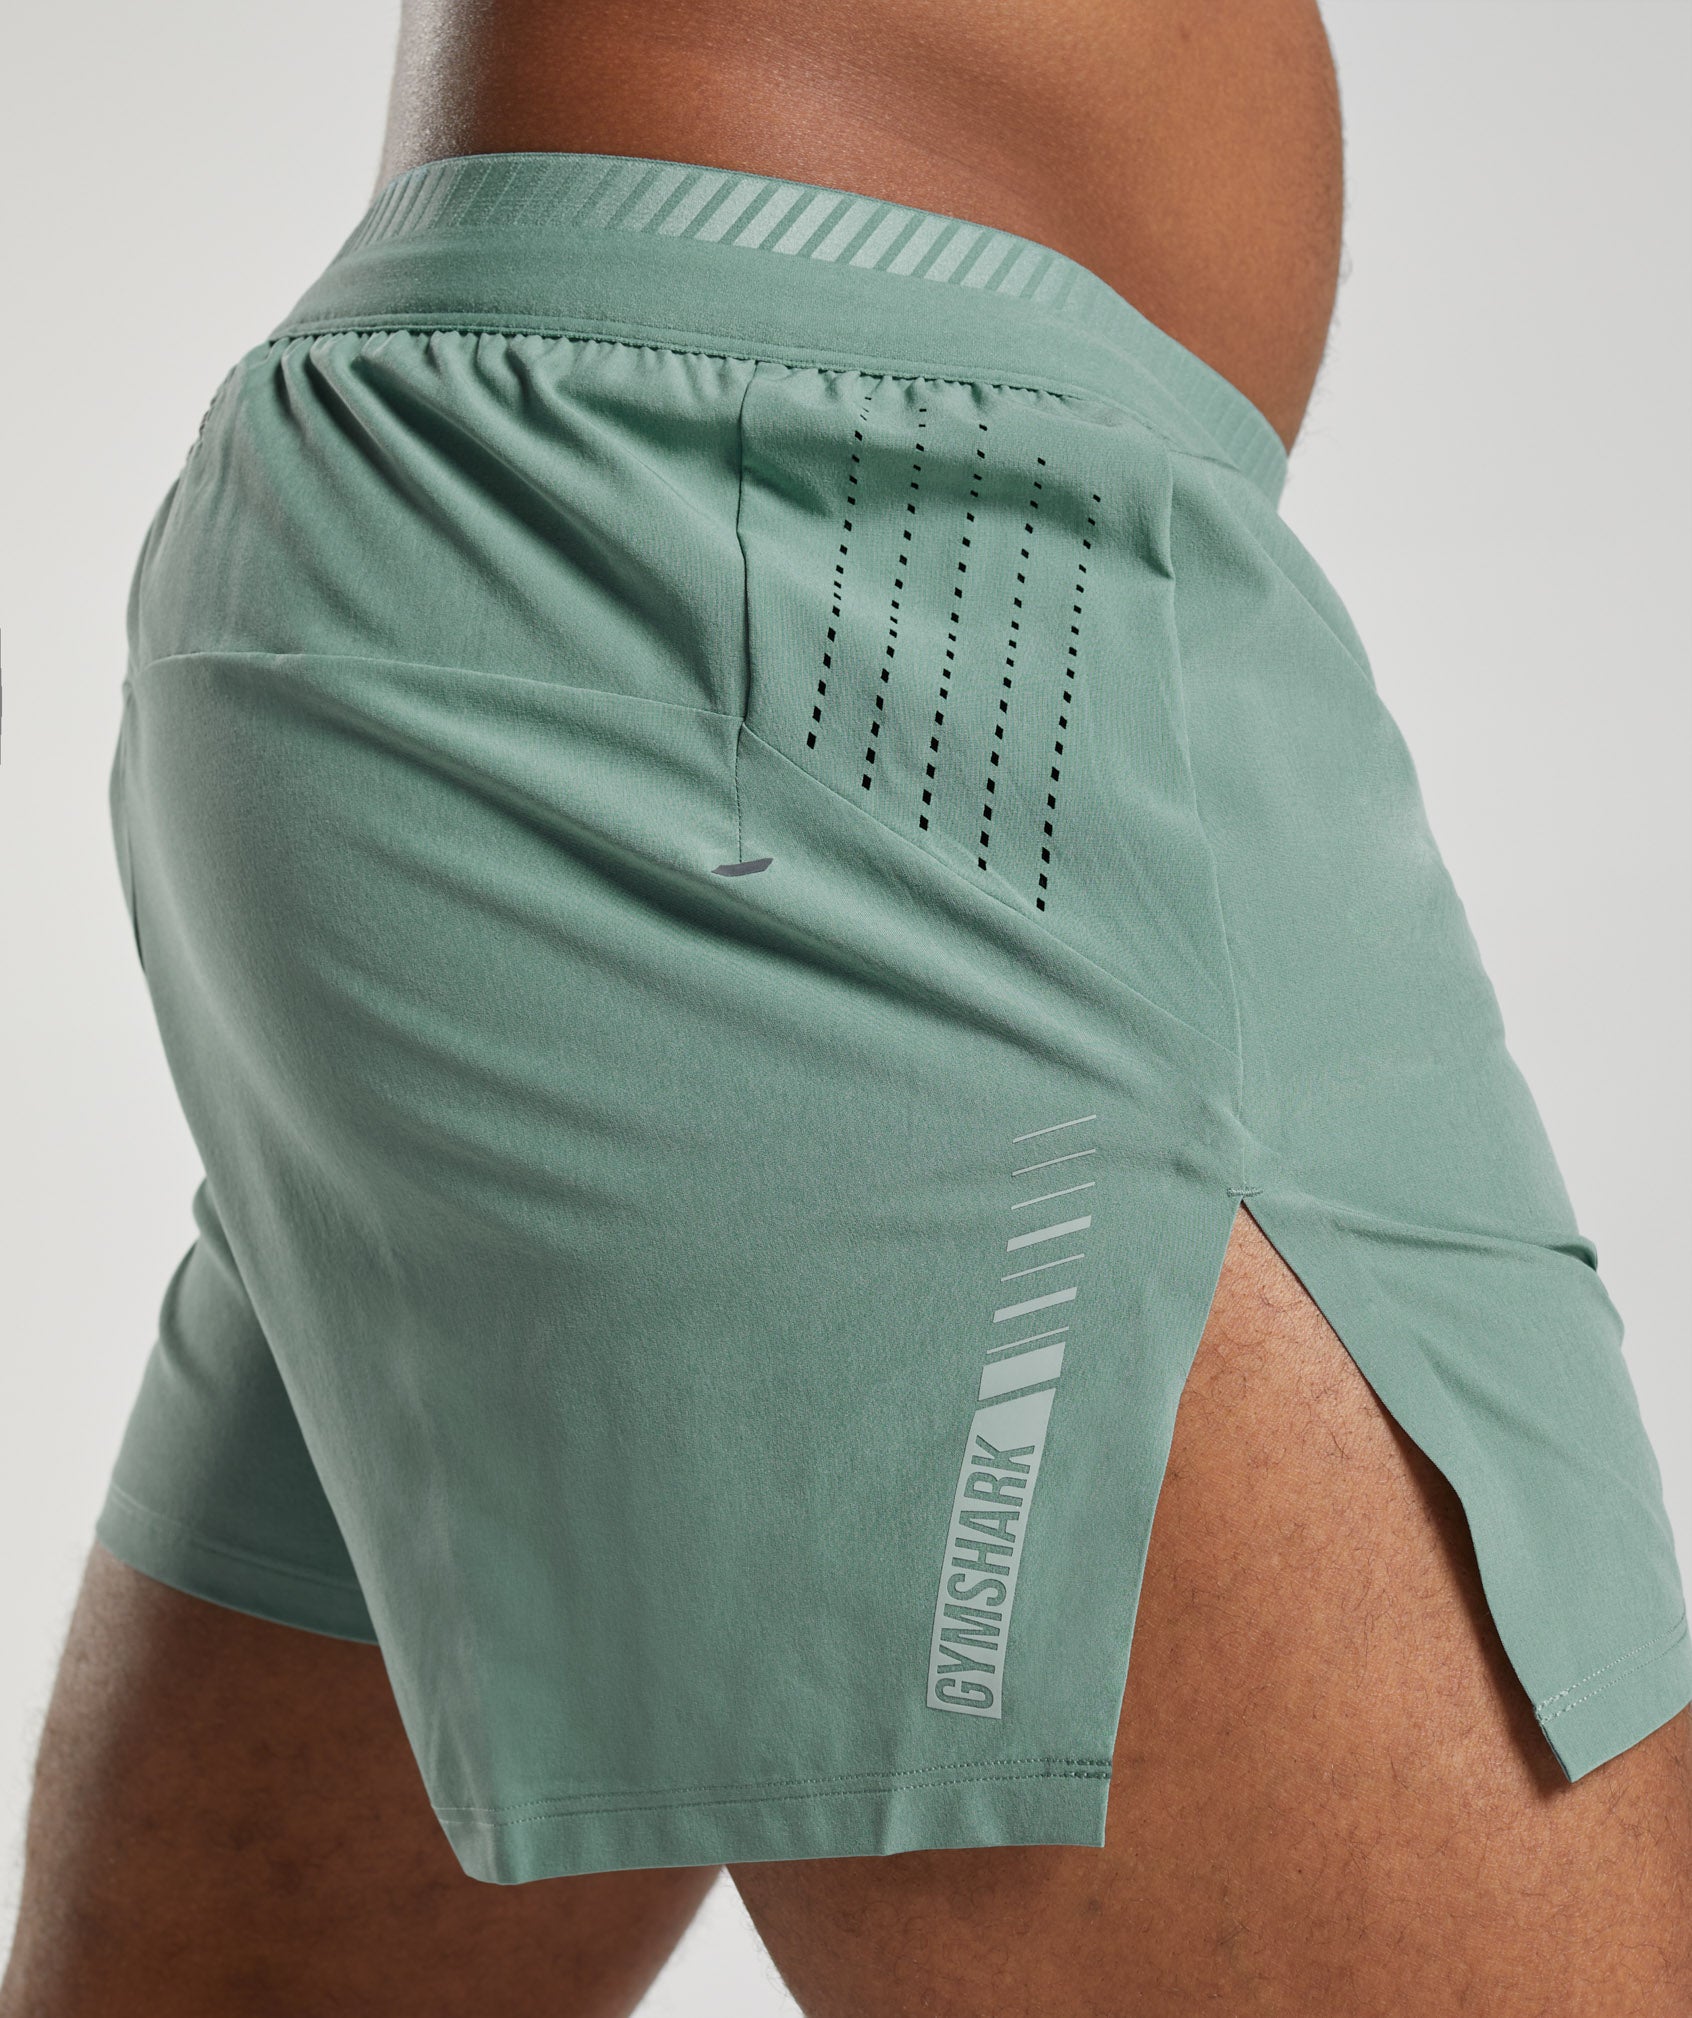 Apex Run 4" Shorts in Ink Teal